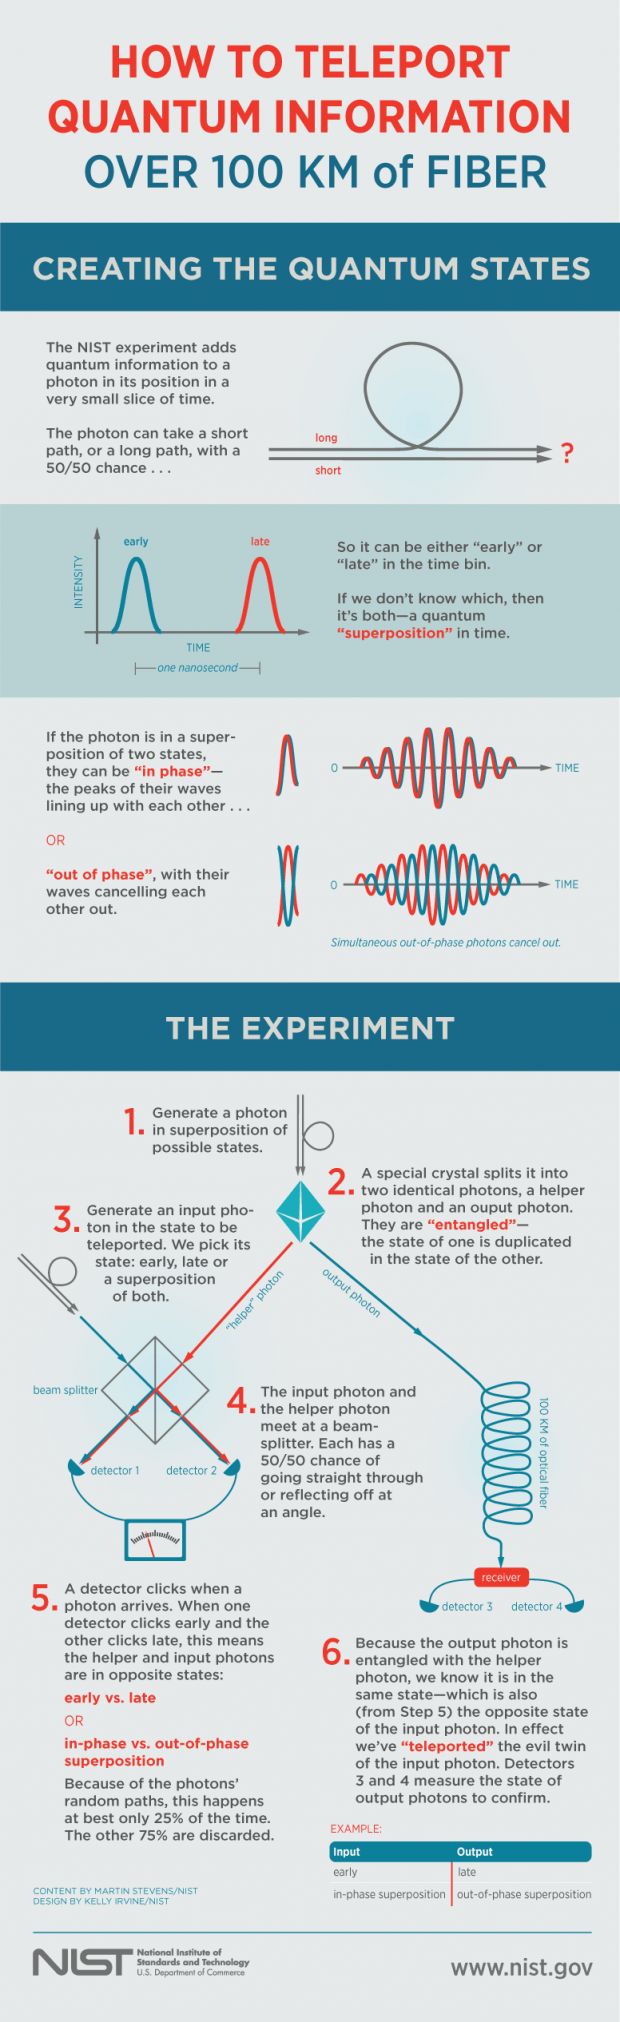 National Institute of Standards and Technology researchers announce new quantum teleportation record